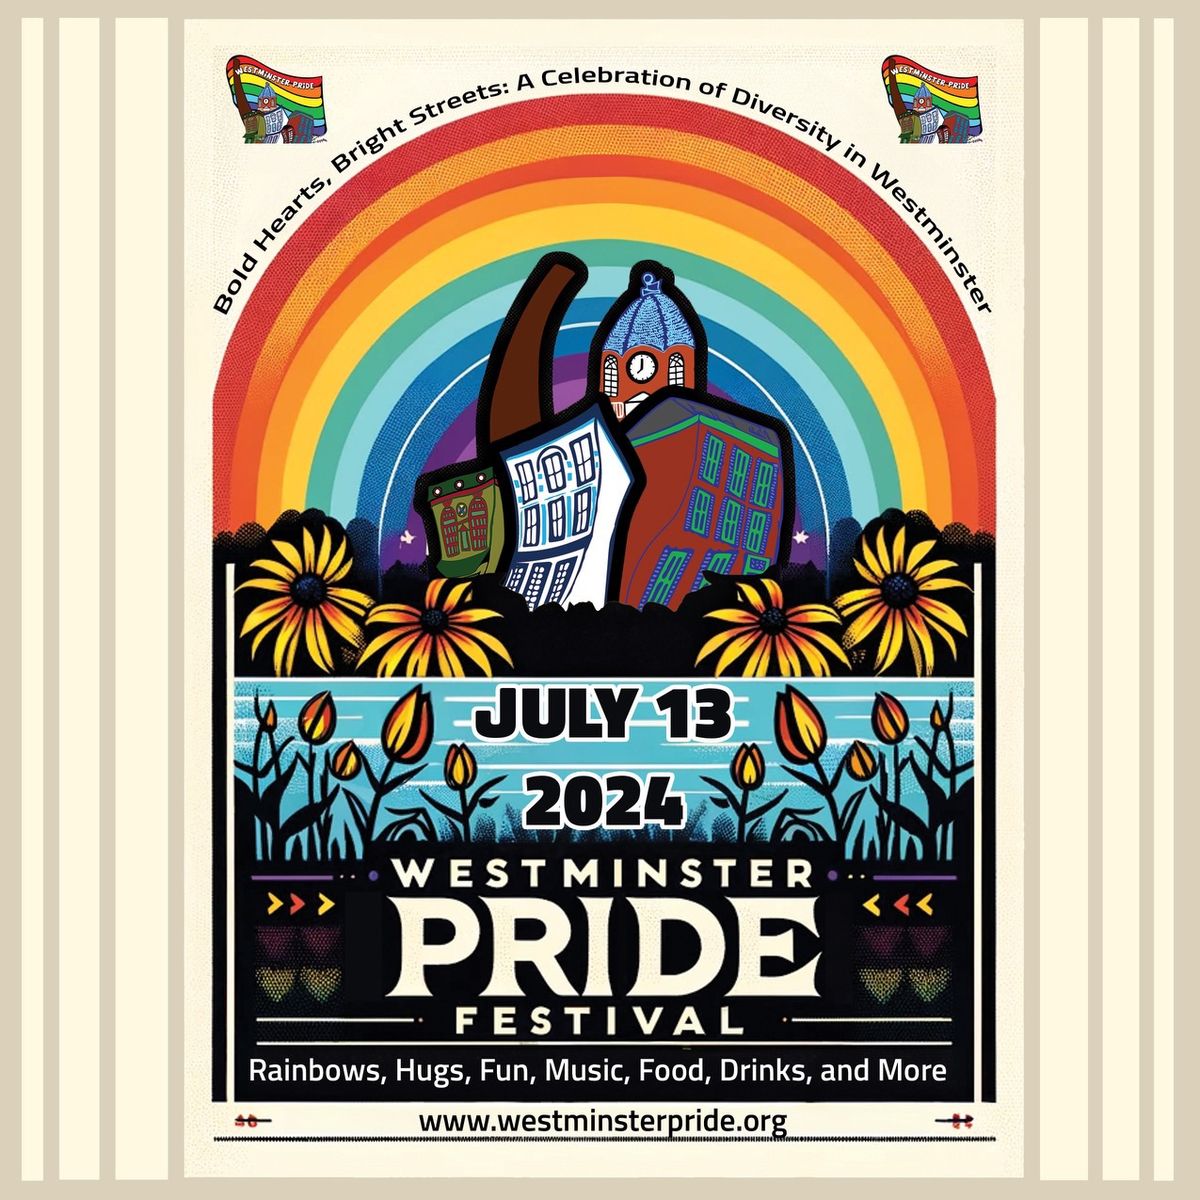 The 6th Annual Westminster Pride Festival